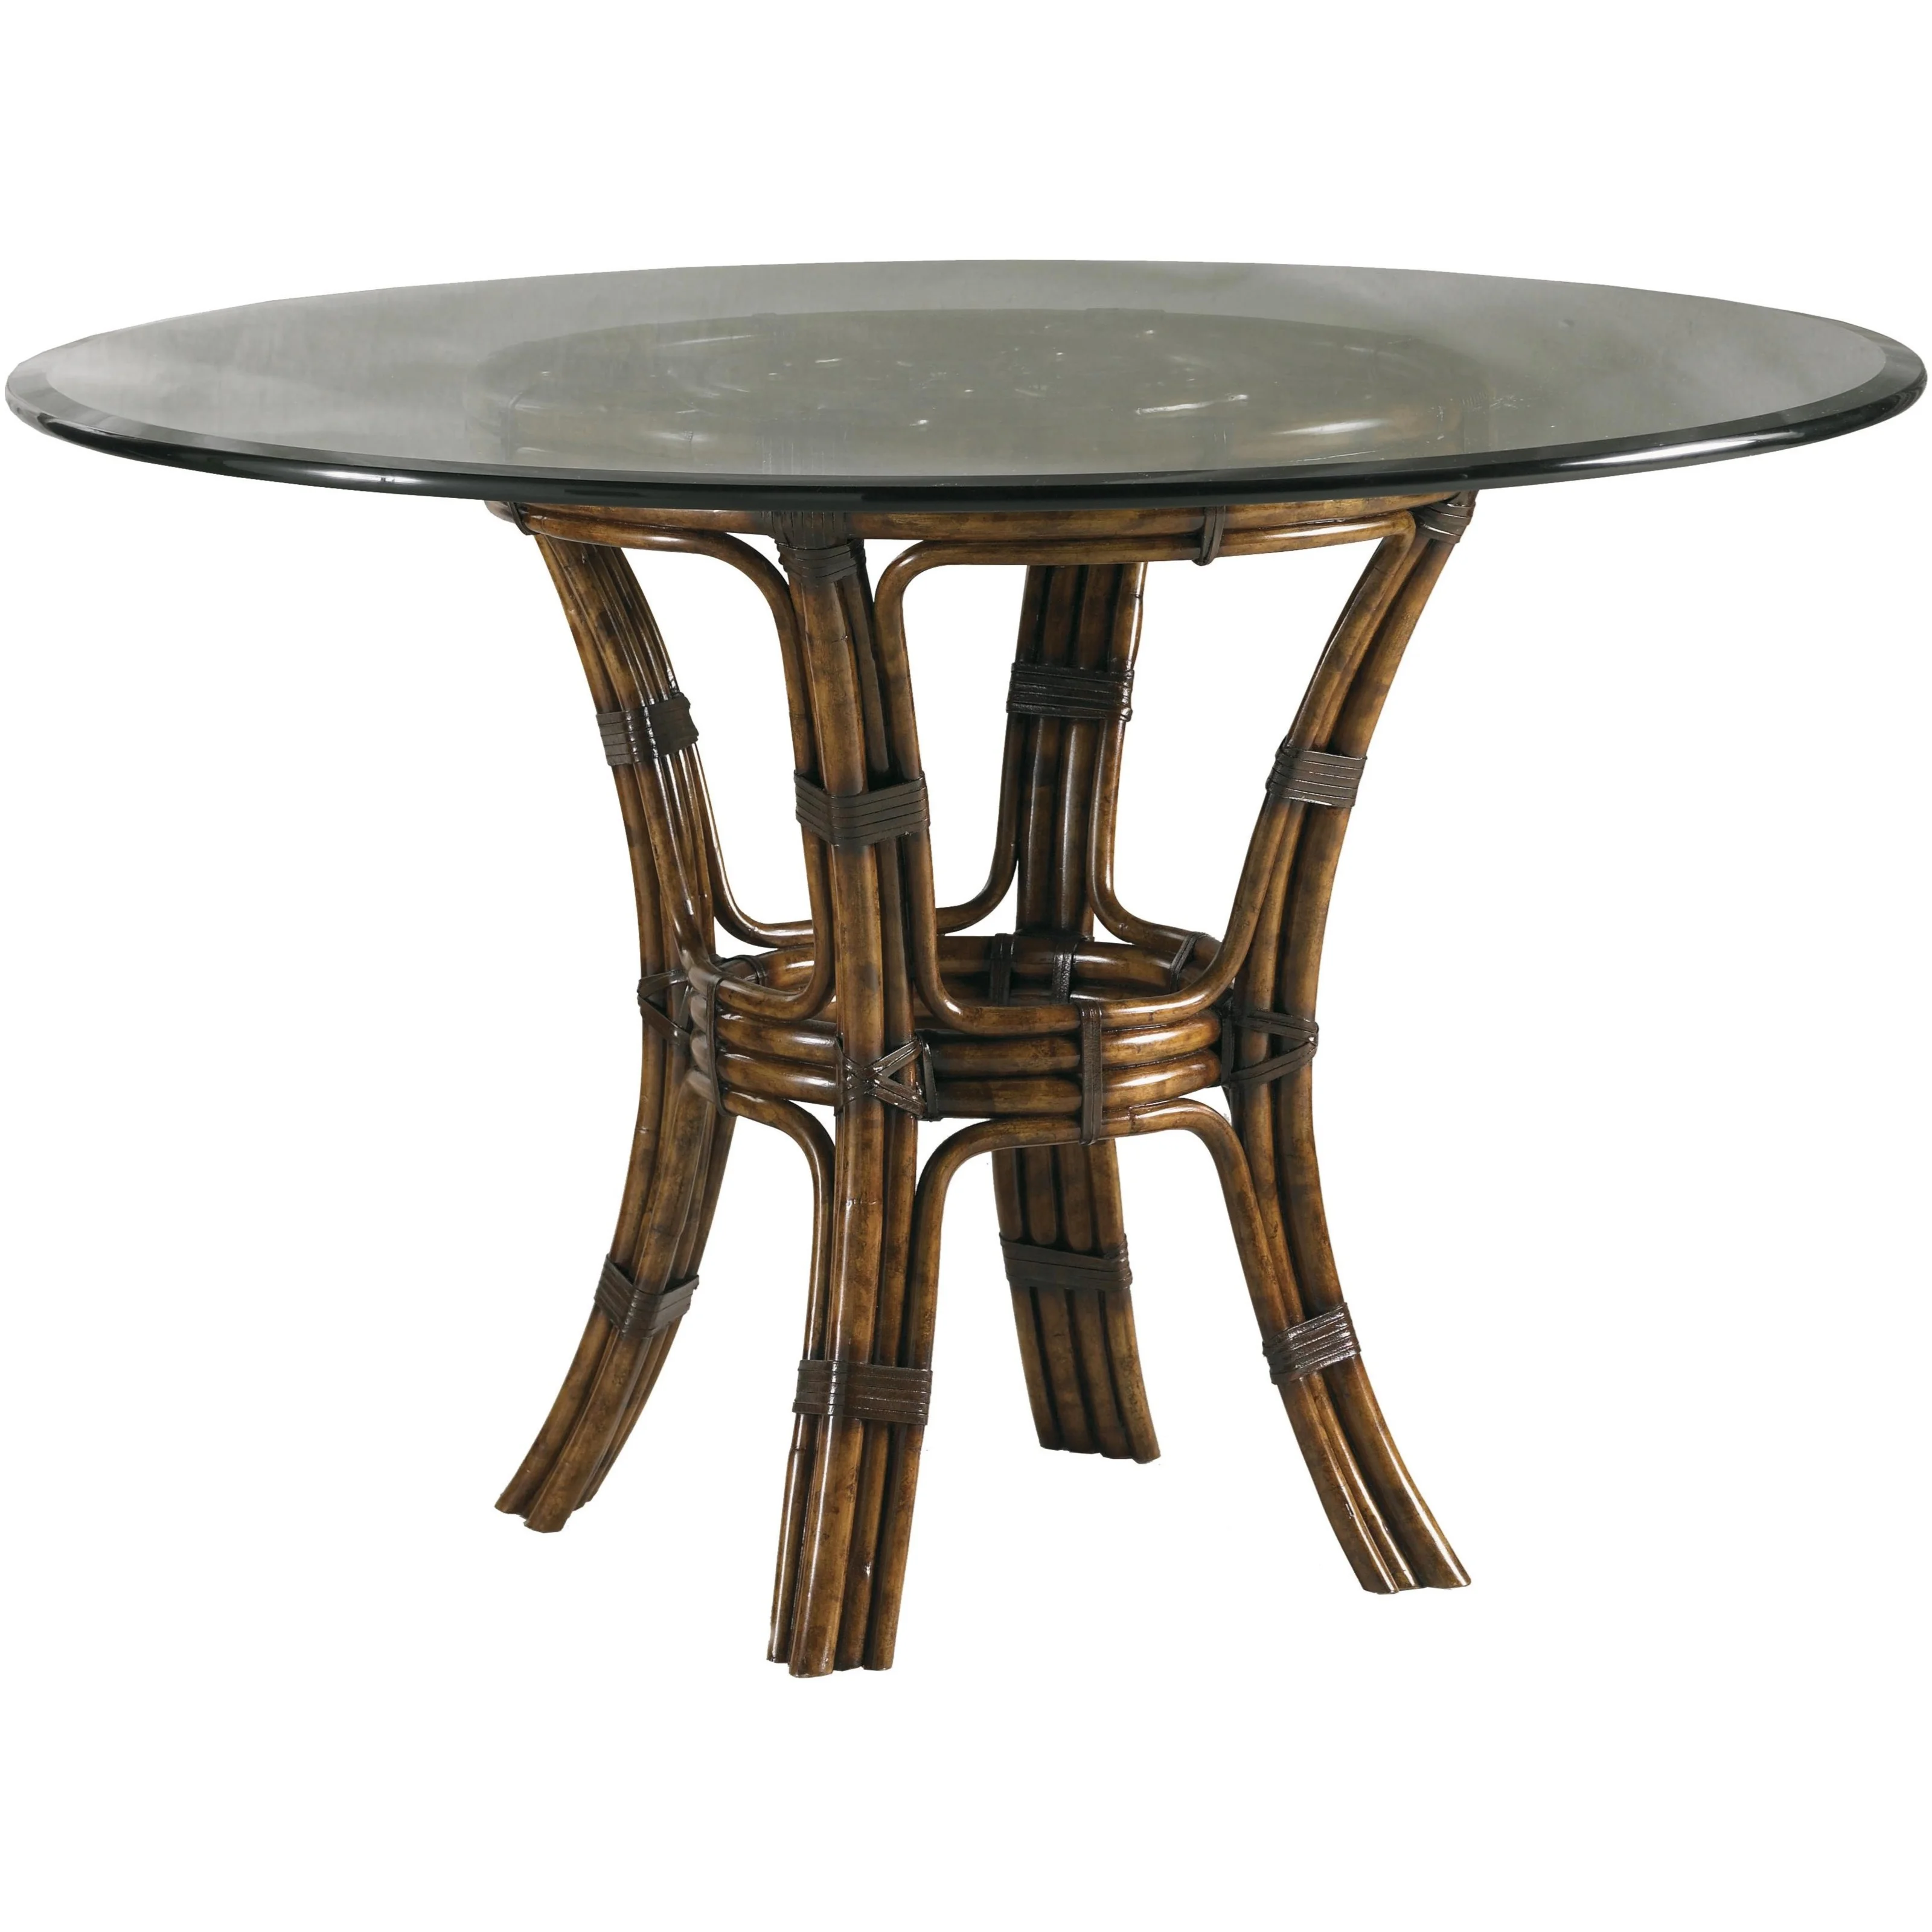 England H839 H839913 Transitional Small Rectangular Cocktail Table with  Casters, Gavigan's Home Furnishings